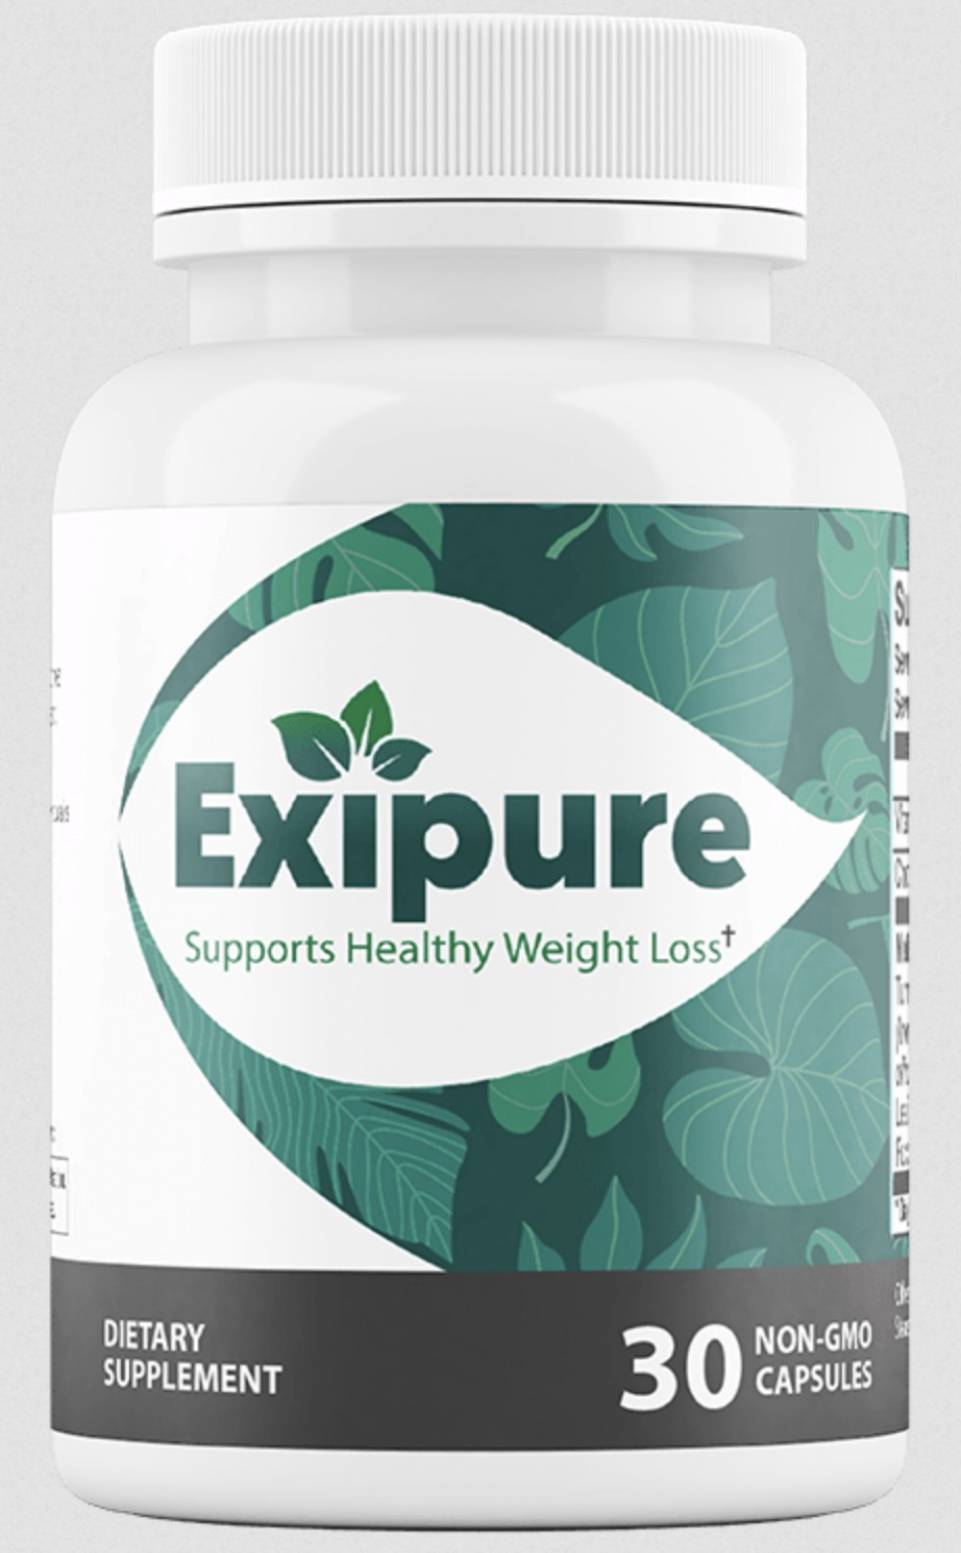 Is Exipure Bbb Accredited